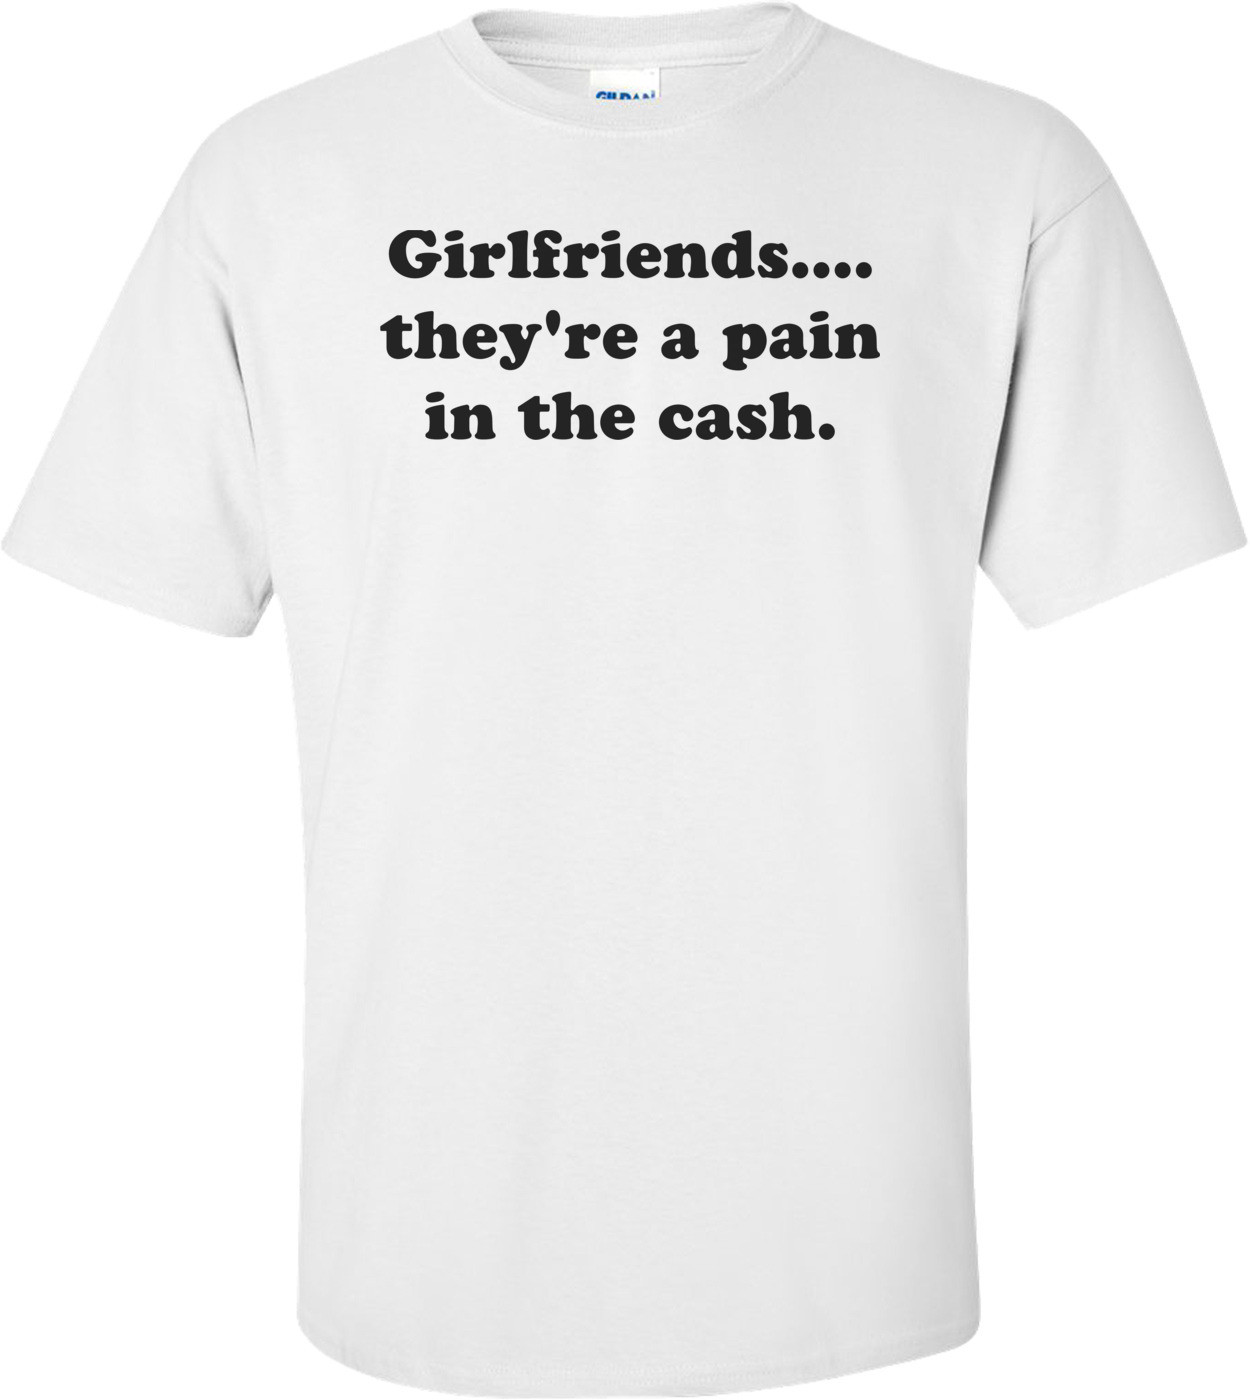 Girlfriends.... they're a pain in the cash. Shirt